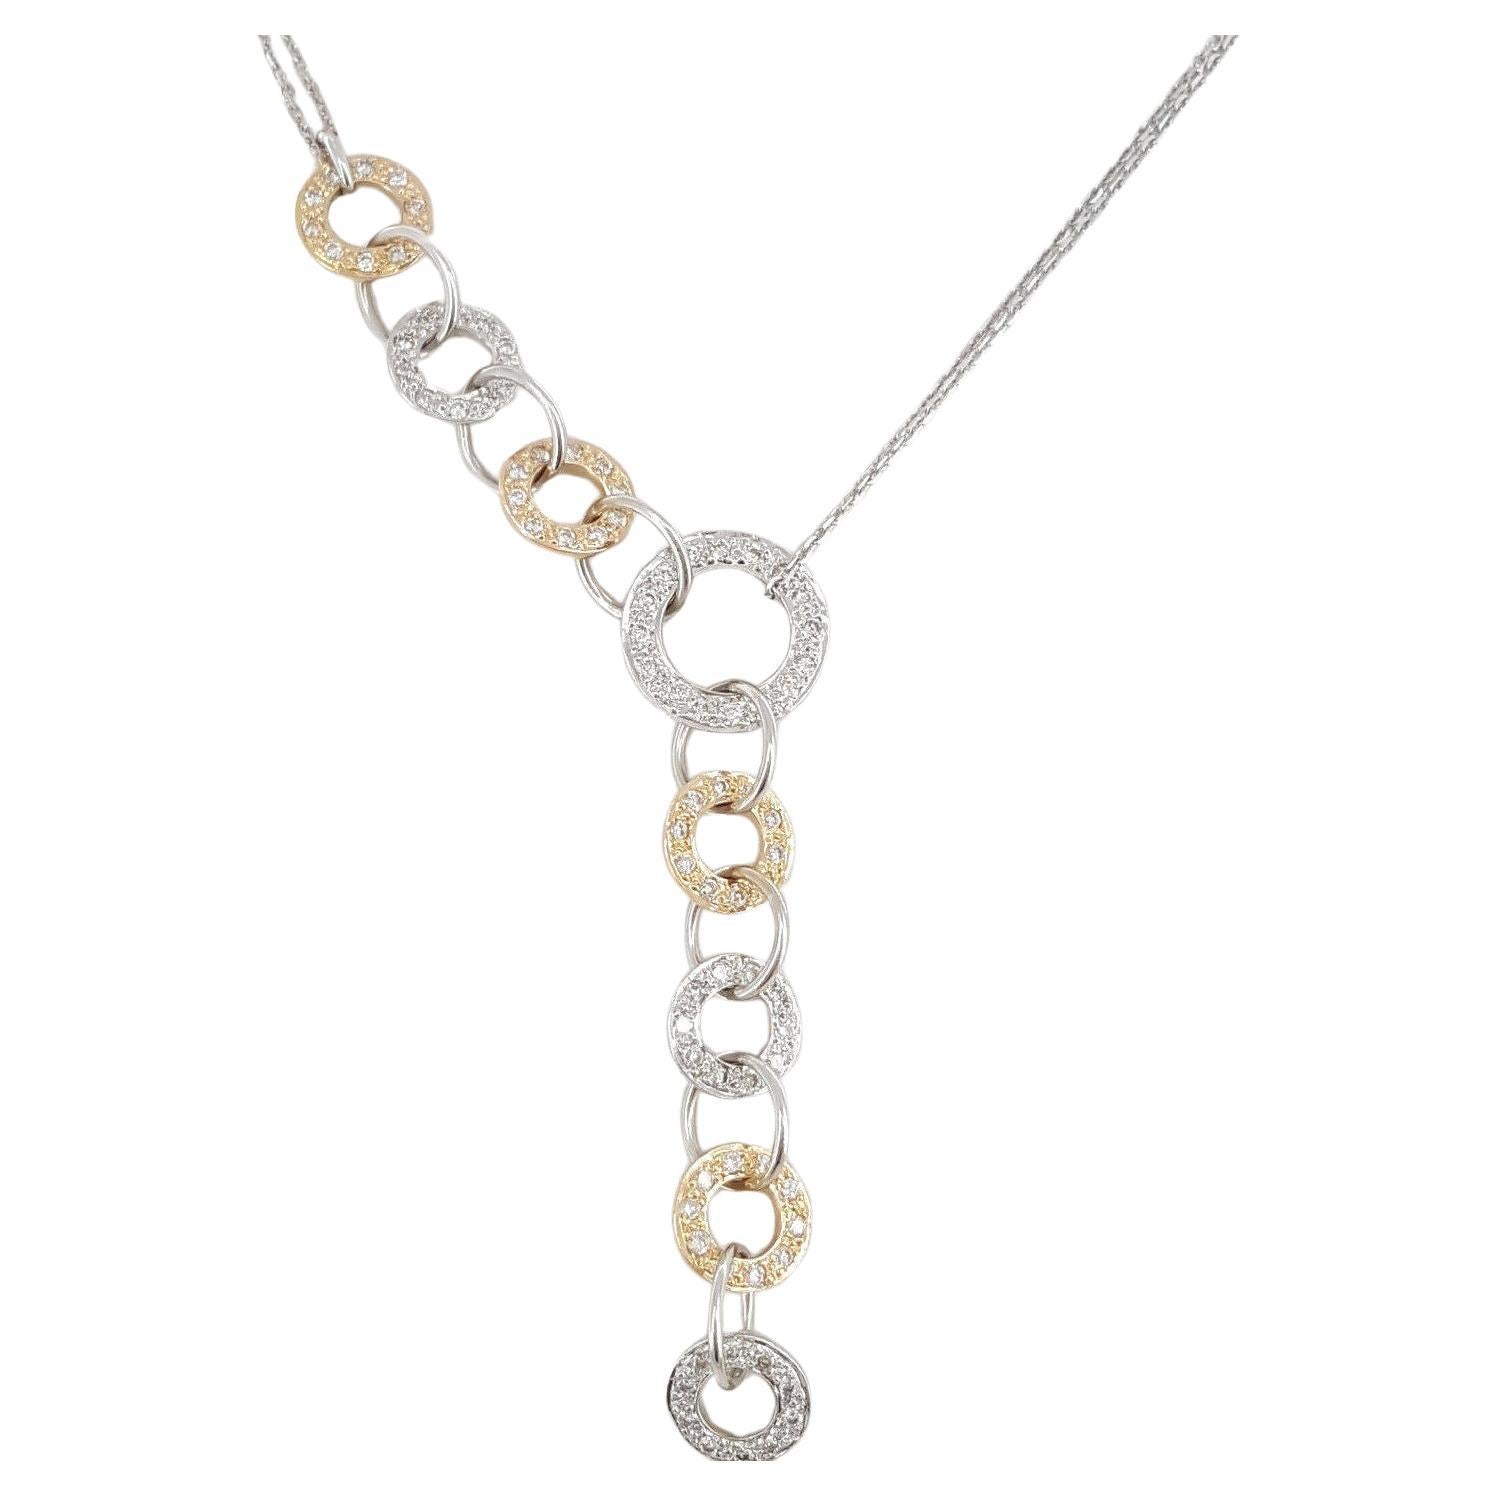 Double Chain Necklace crafted in 18k White & Rose Gold Circles Necklace